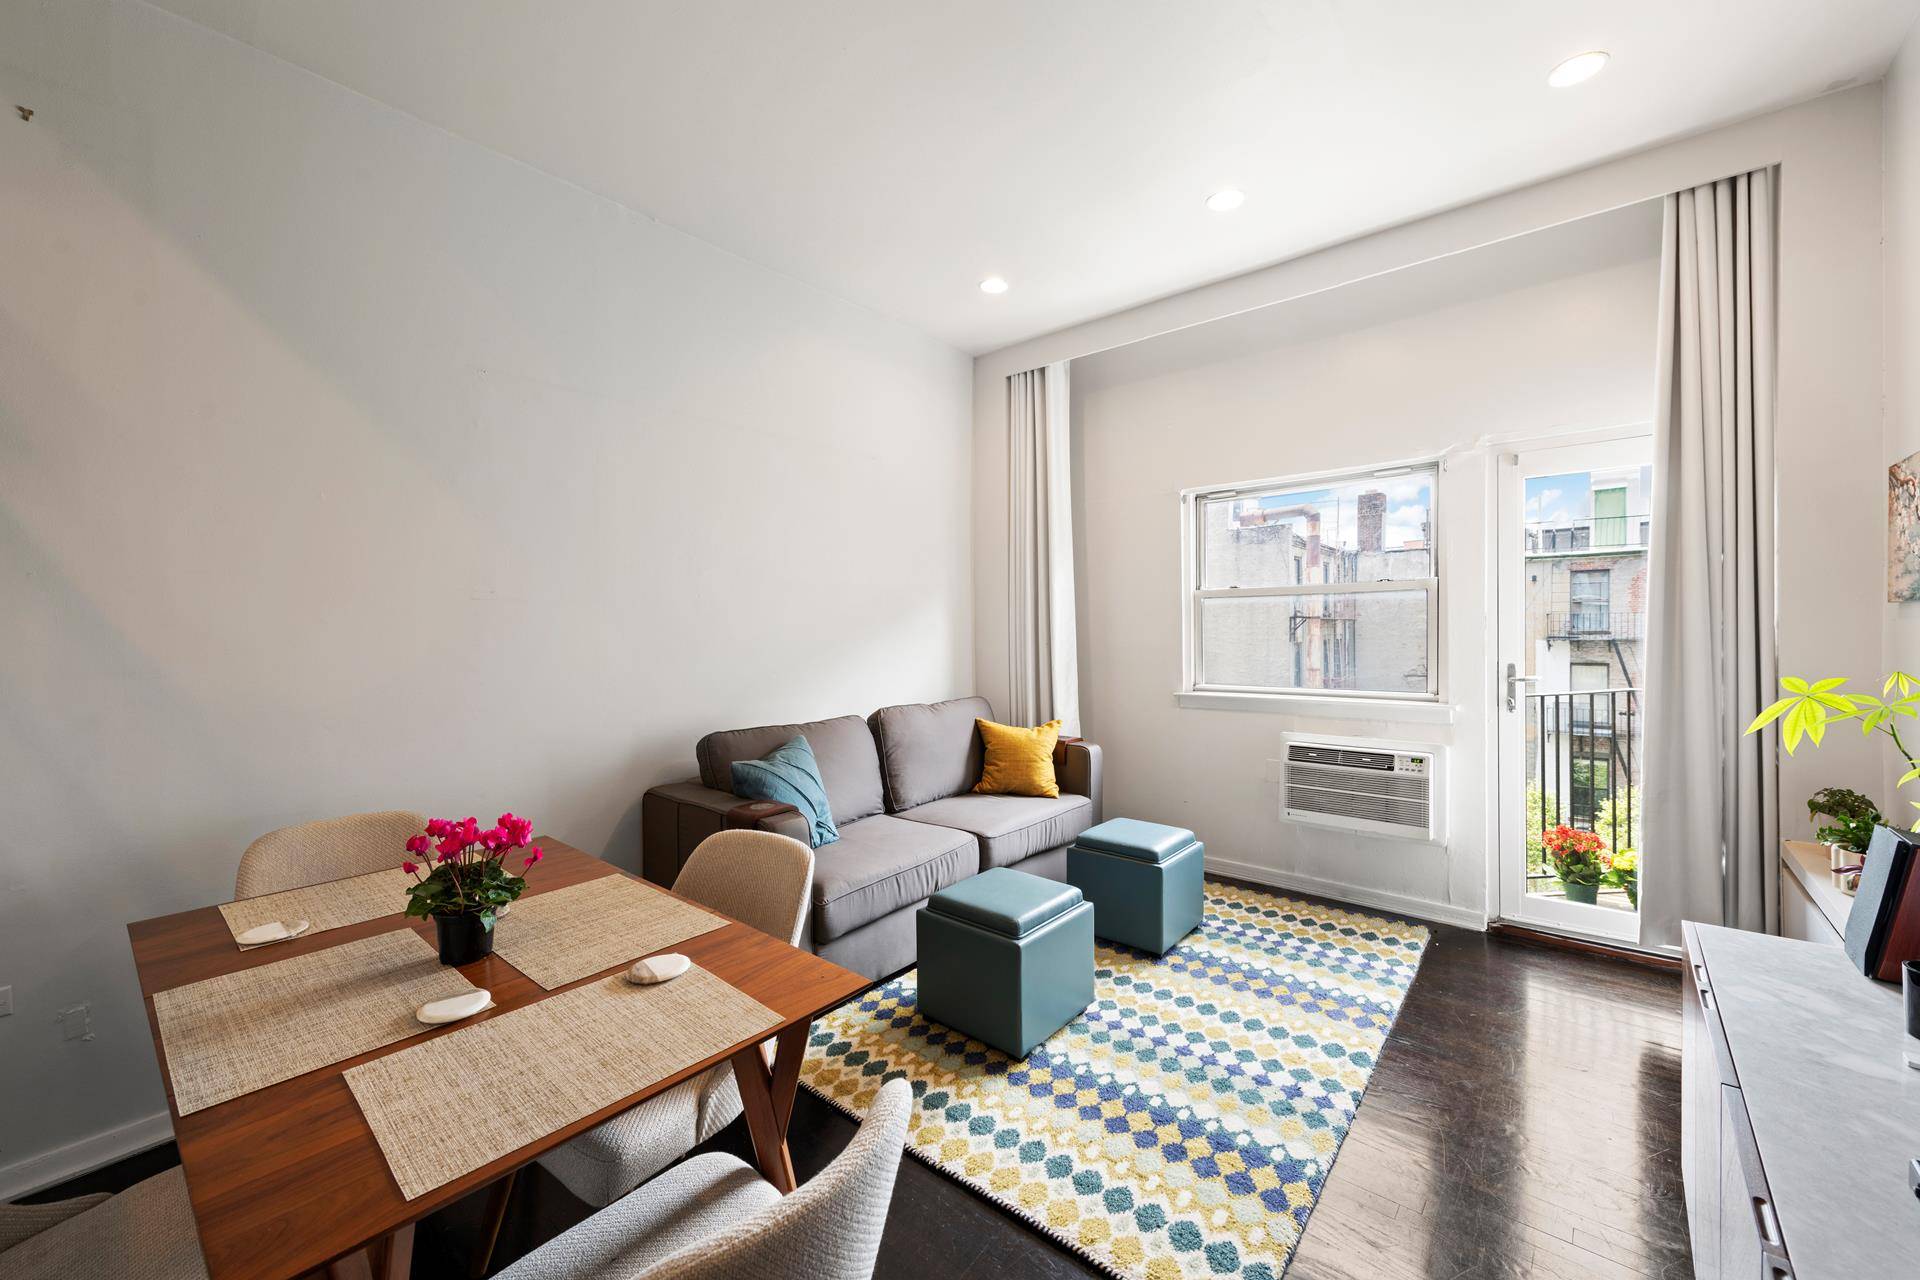 Apartment 4N at 211 Thompson Street is perfectly located in the heart of Greenwich Village, just south of Washington Square Park and NYU.